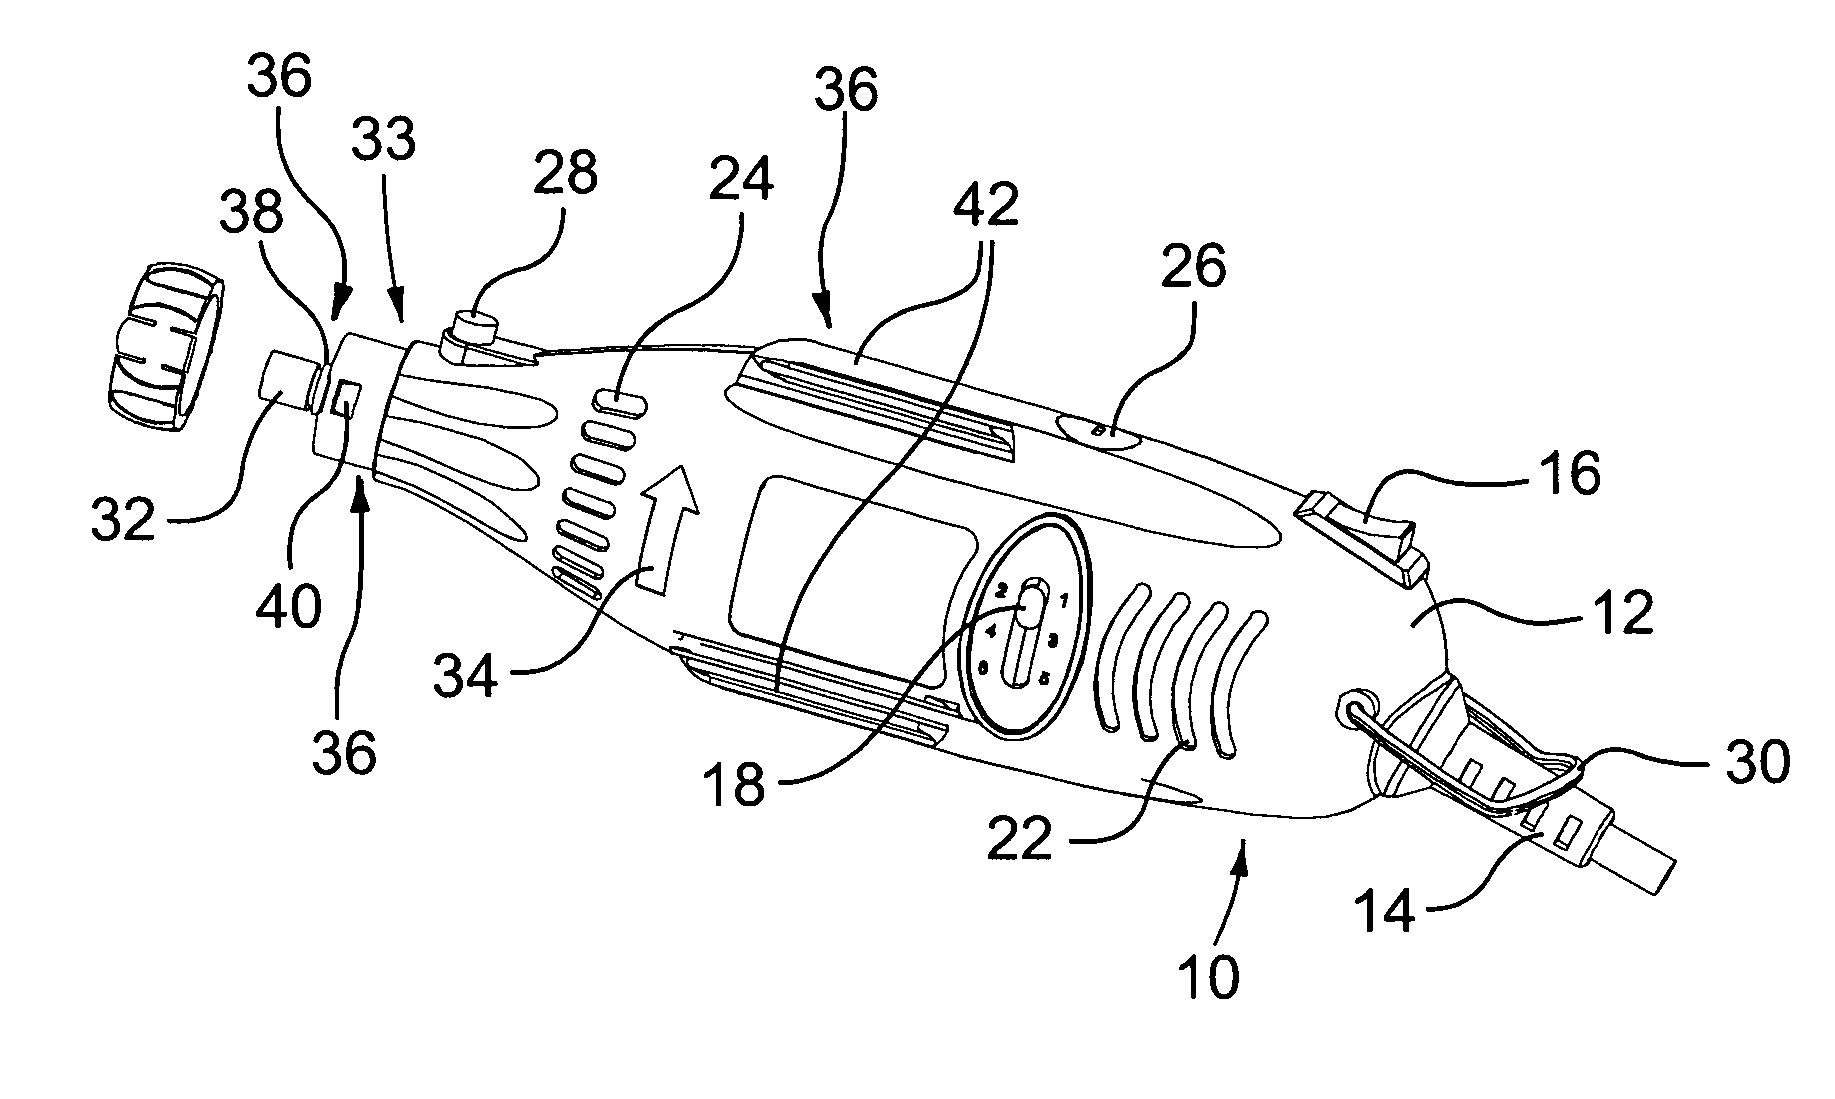 Rotary tool with quick connect means and attachments thereto